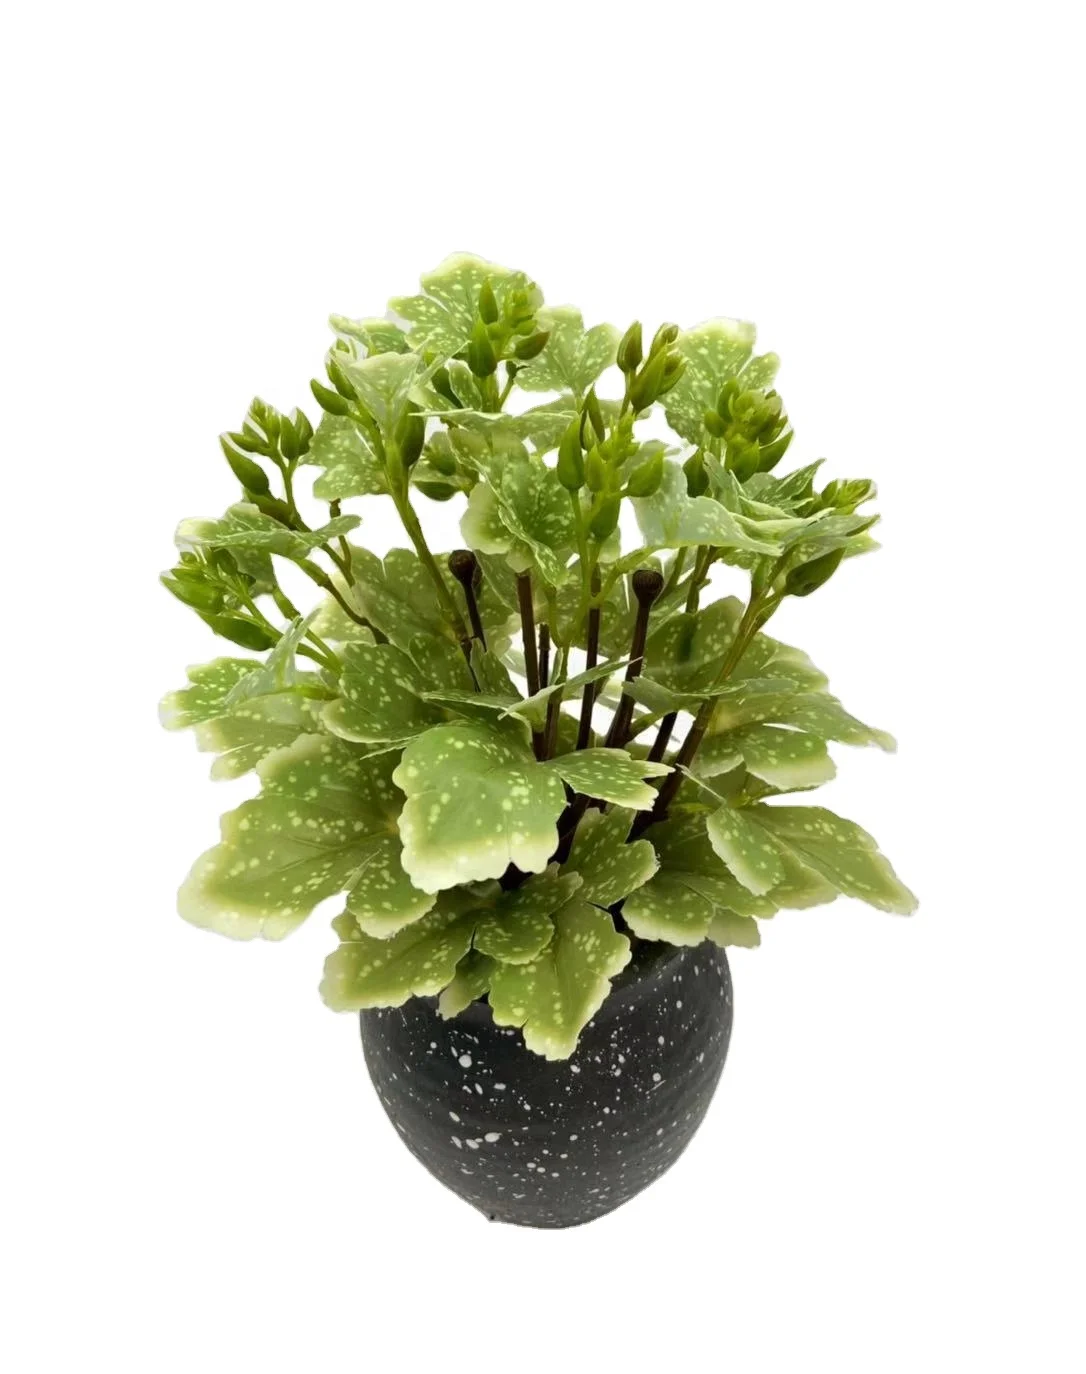 

Mini bonsai artificial small potted plant greenery leaves for desk indoor decoration, Green yellow and brown color